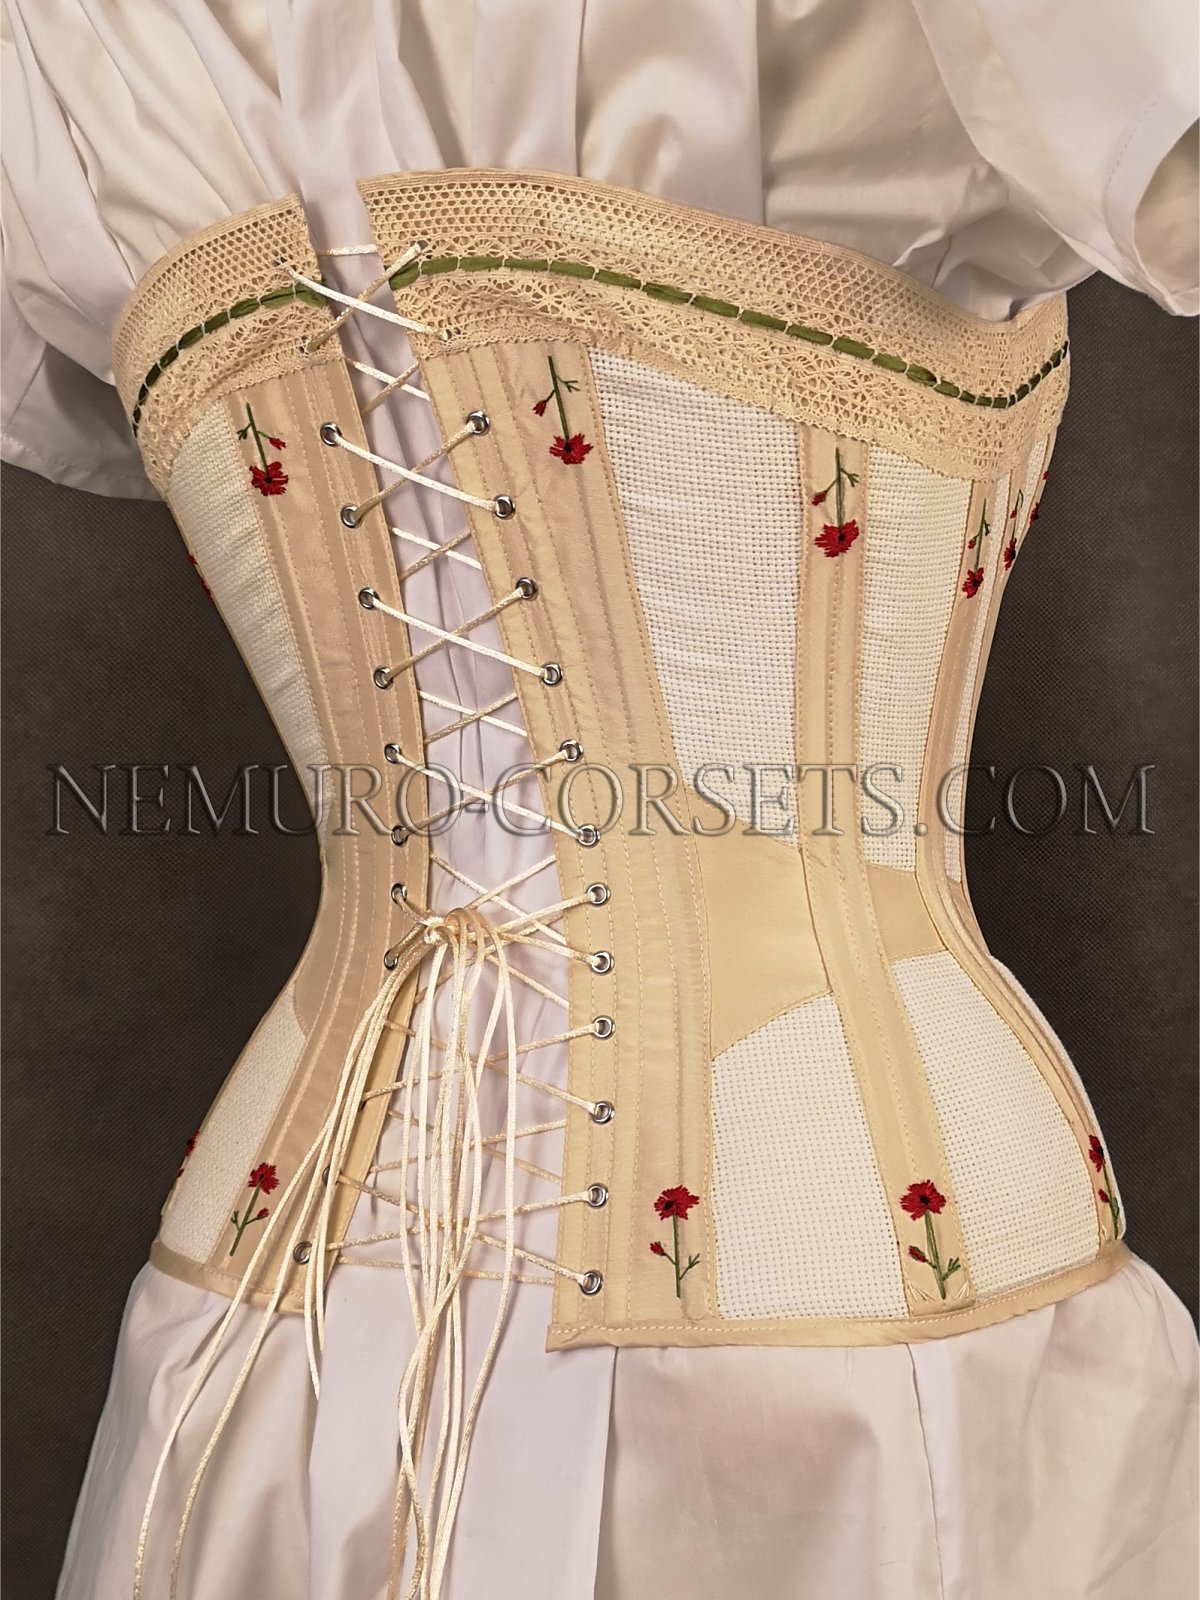 Victorian Corsets - Old Fashioned Corsets & Patterns